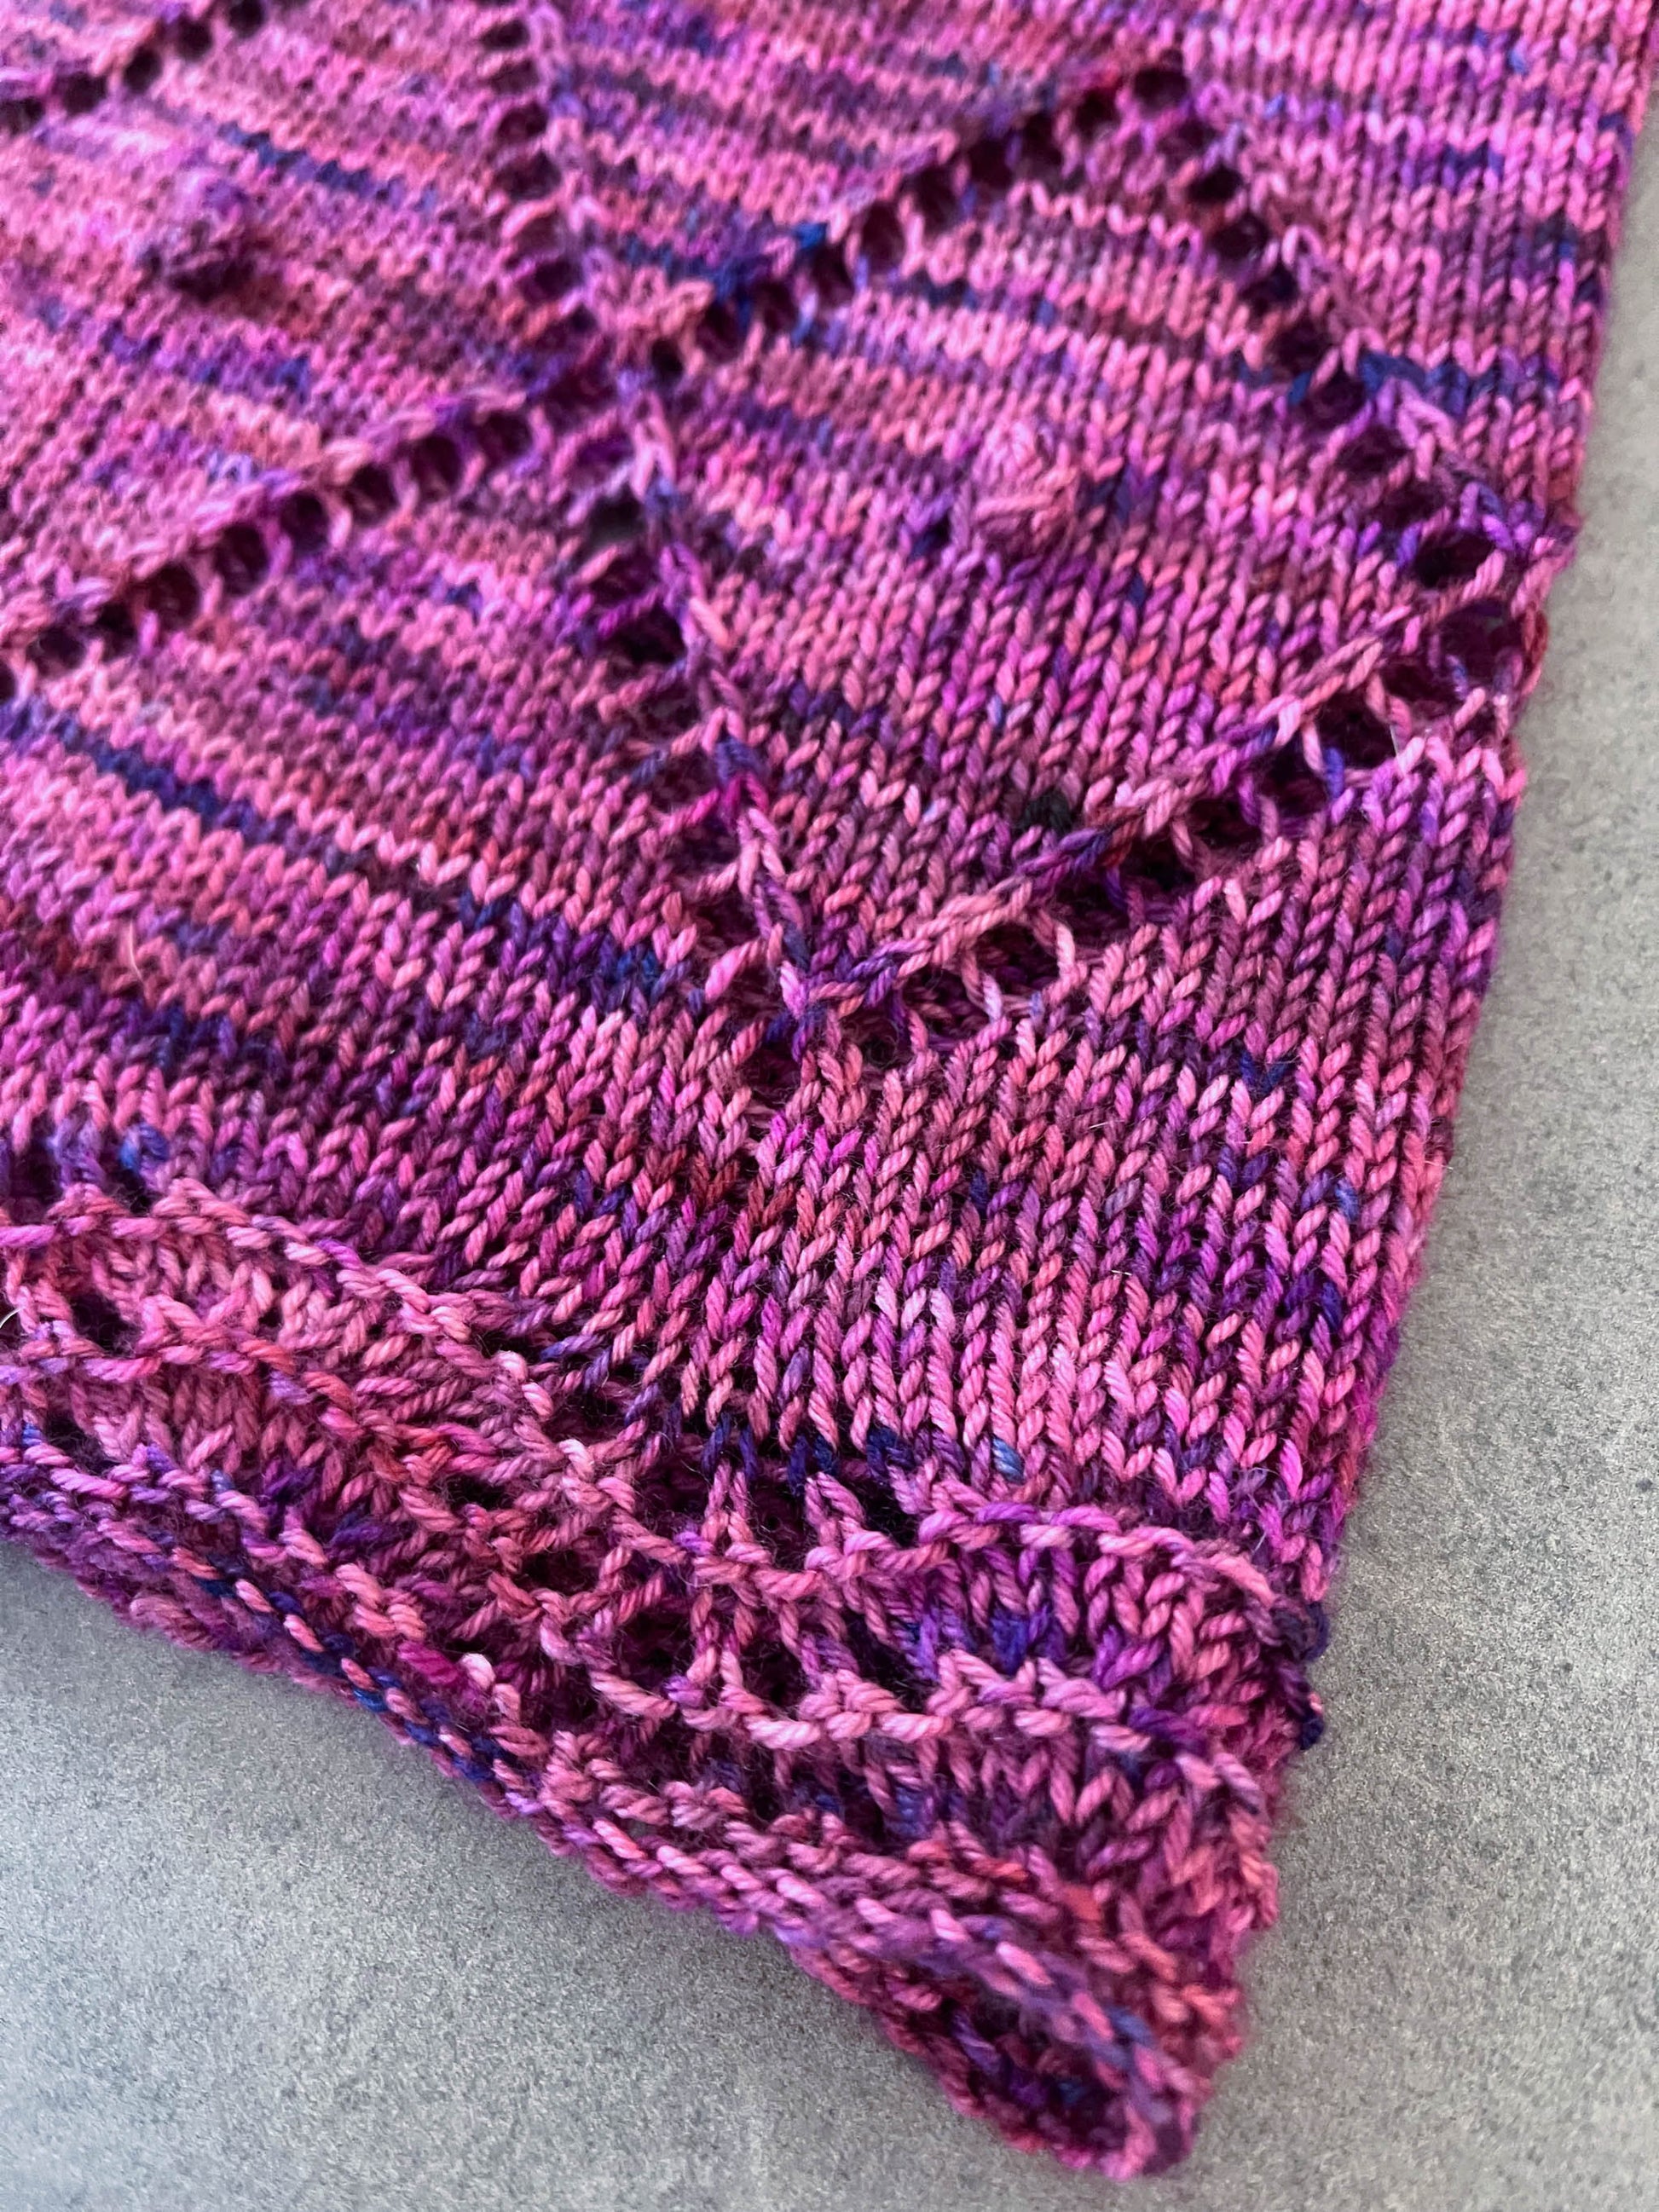 A corner view of a knit cowl with a wave border, lace zig-zag pattern, and popcorn stitch accents.